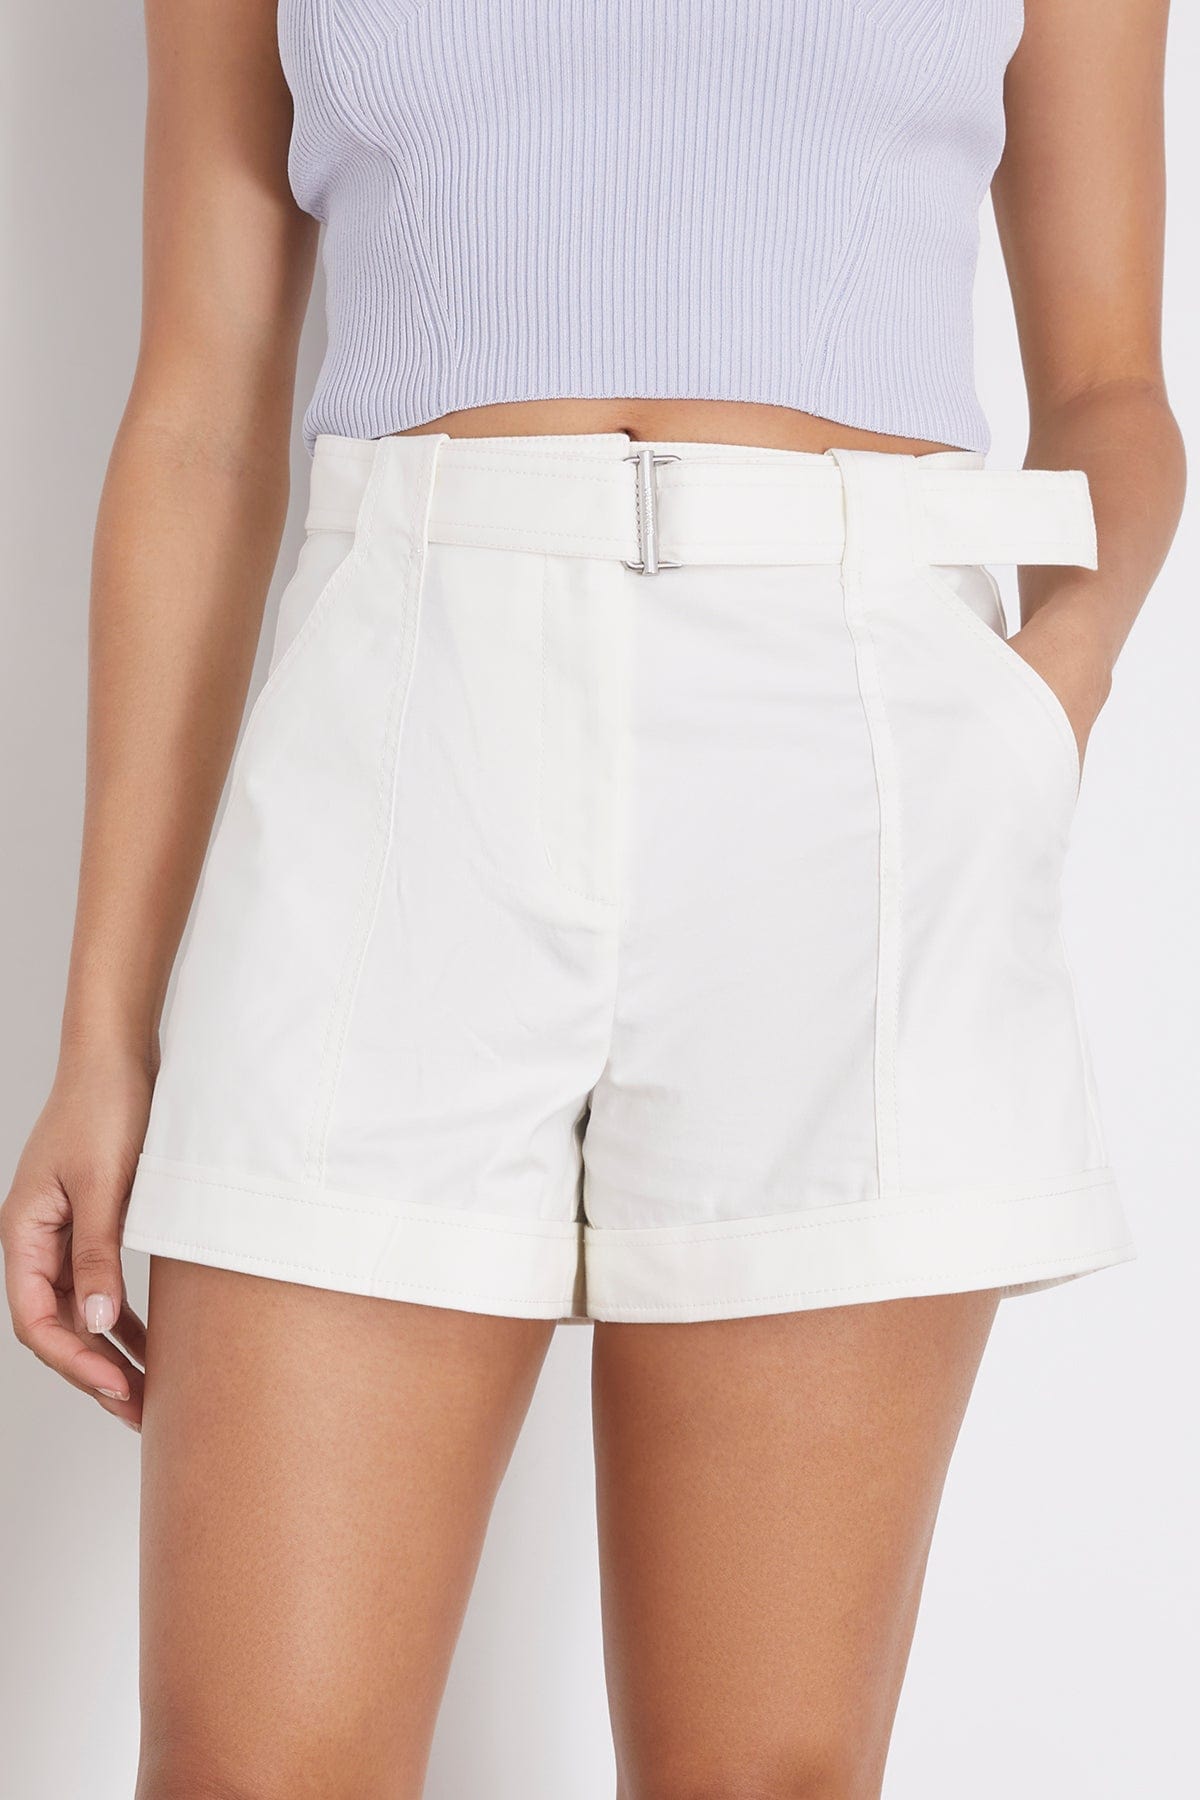 Simkhai Shorts Lourie Belted Shorts in White